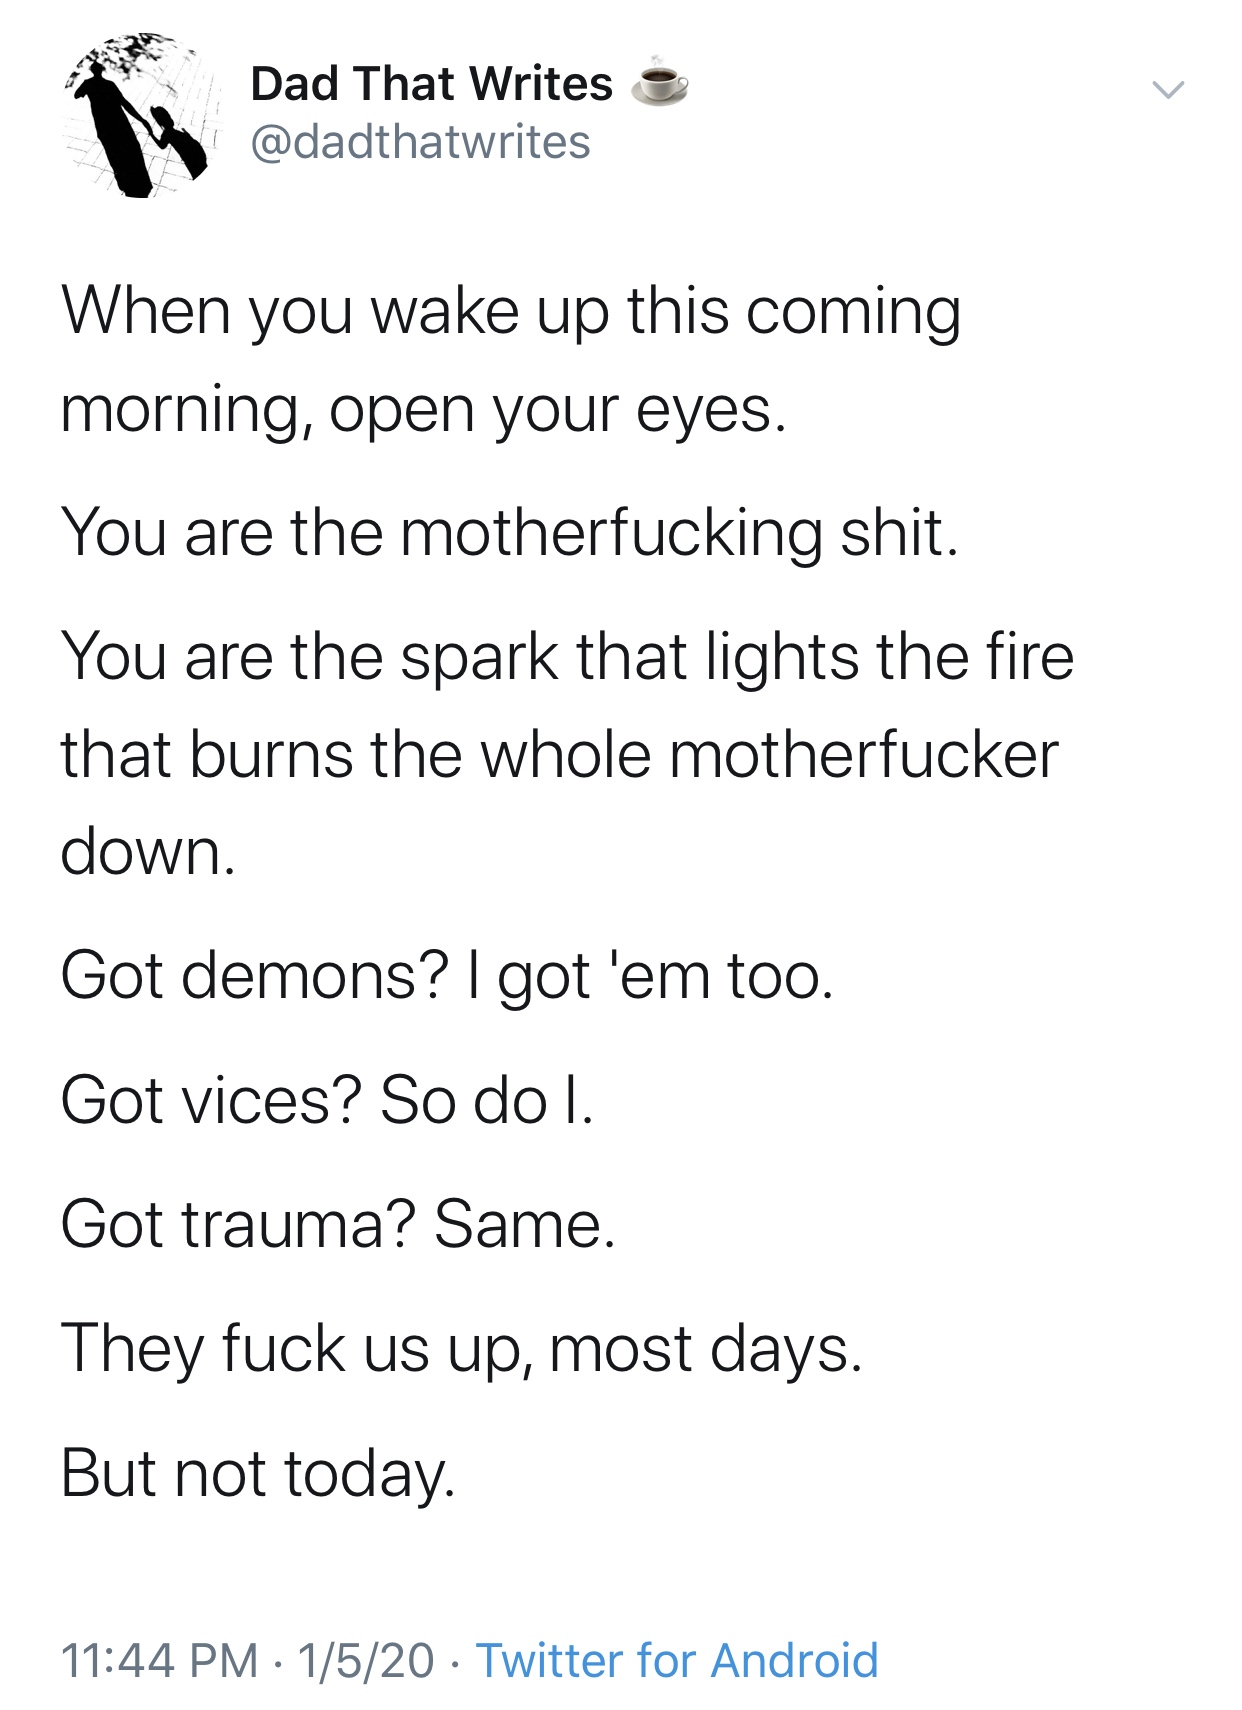 angle - Dad That Writes e When you wake up this coming morning, open your eyes. You are the motherfucking shit. You are the spark that lights the fire that burns the whole motherfucker down. Got demons? I got 'em too. Got vices? So dol. Got trauma? Same. 